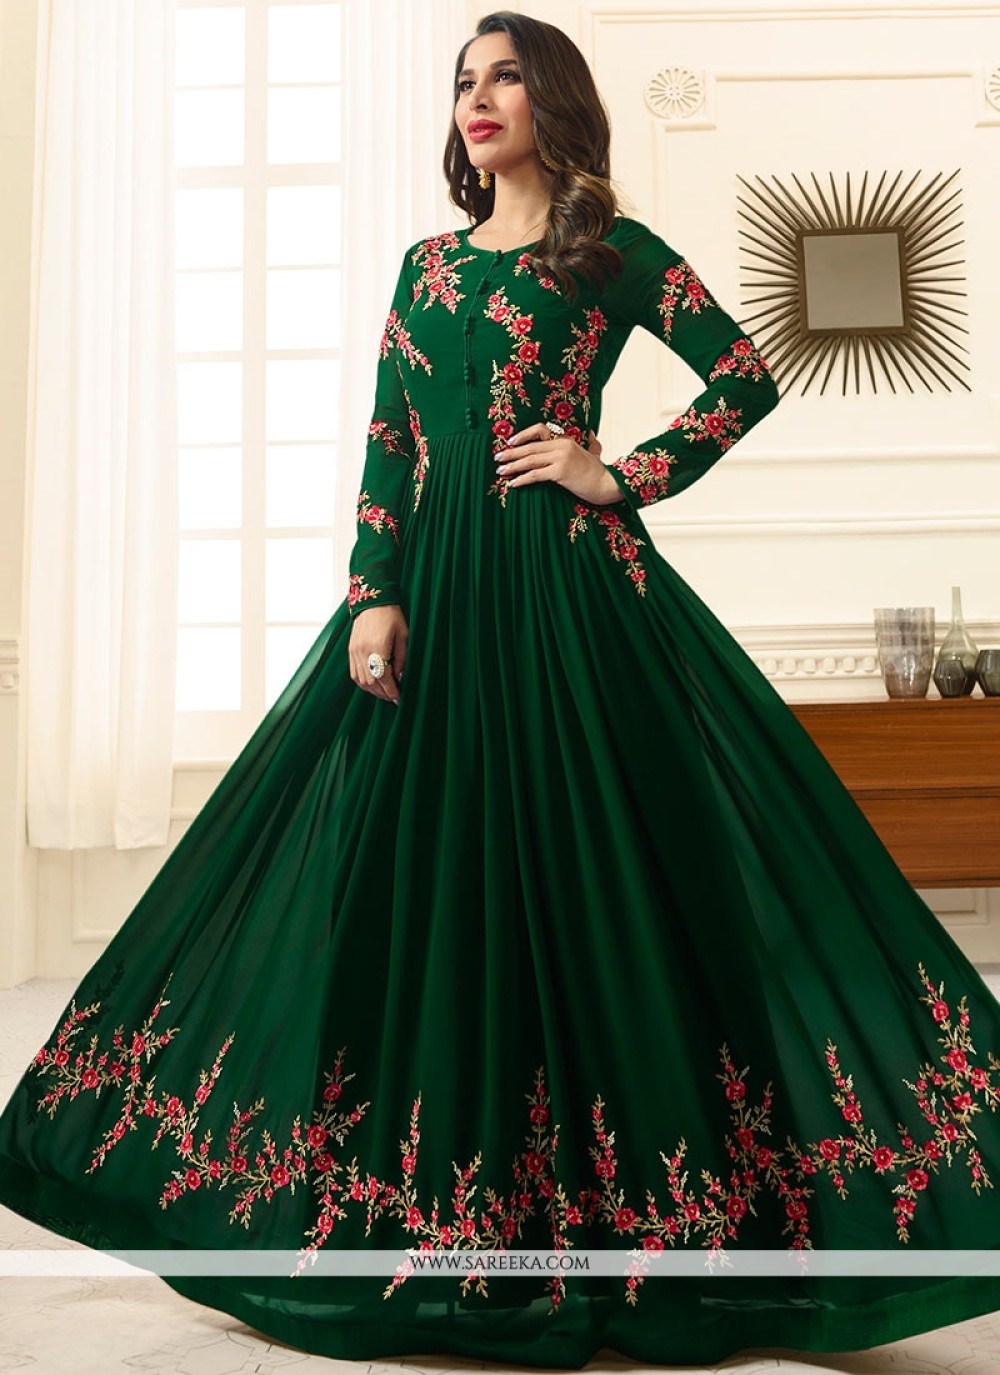 Sophie Chaudhary Green Embroidered Work Floor Length Anarkali Suit